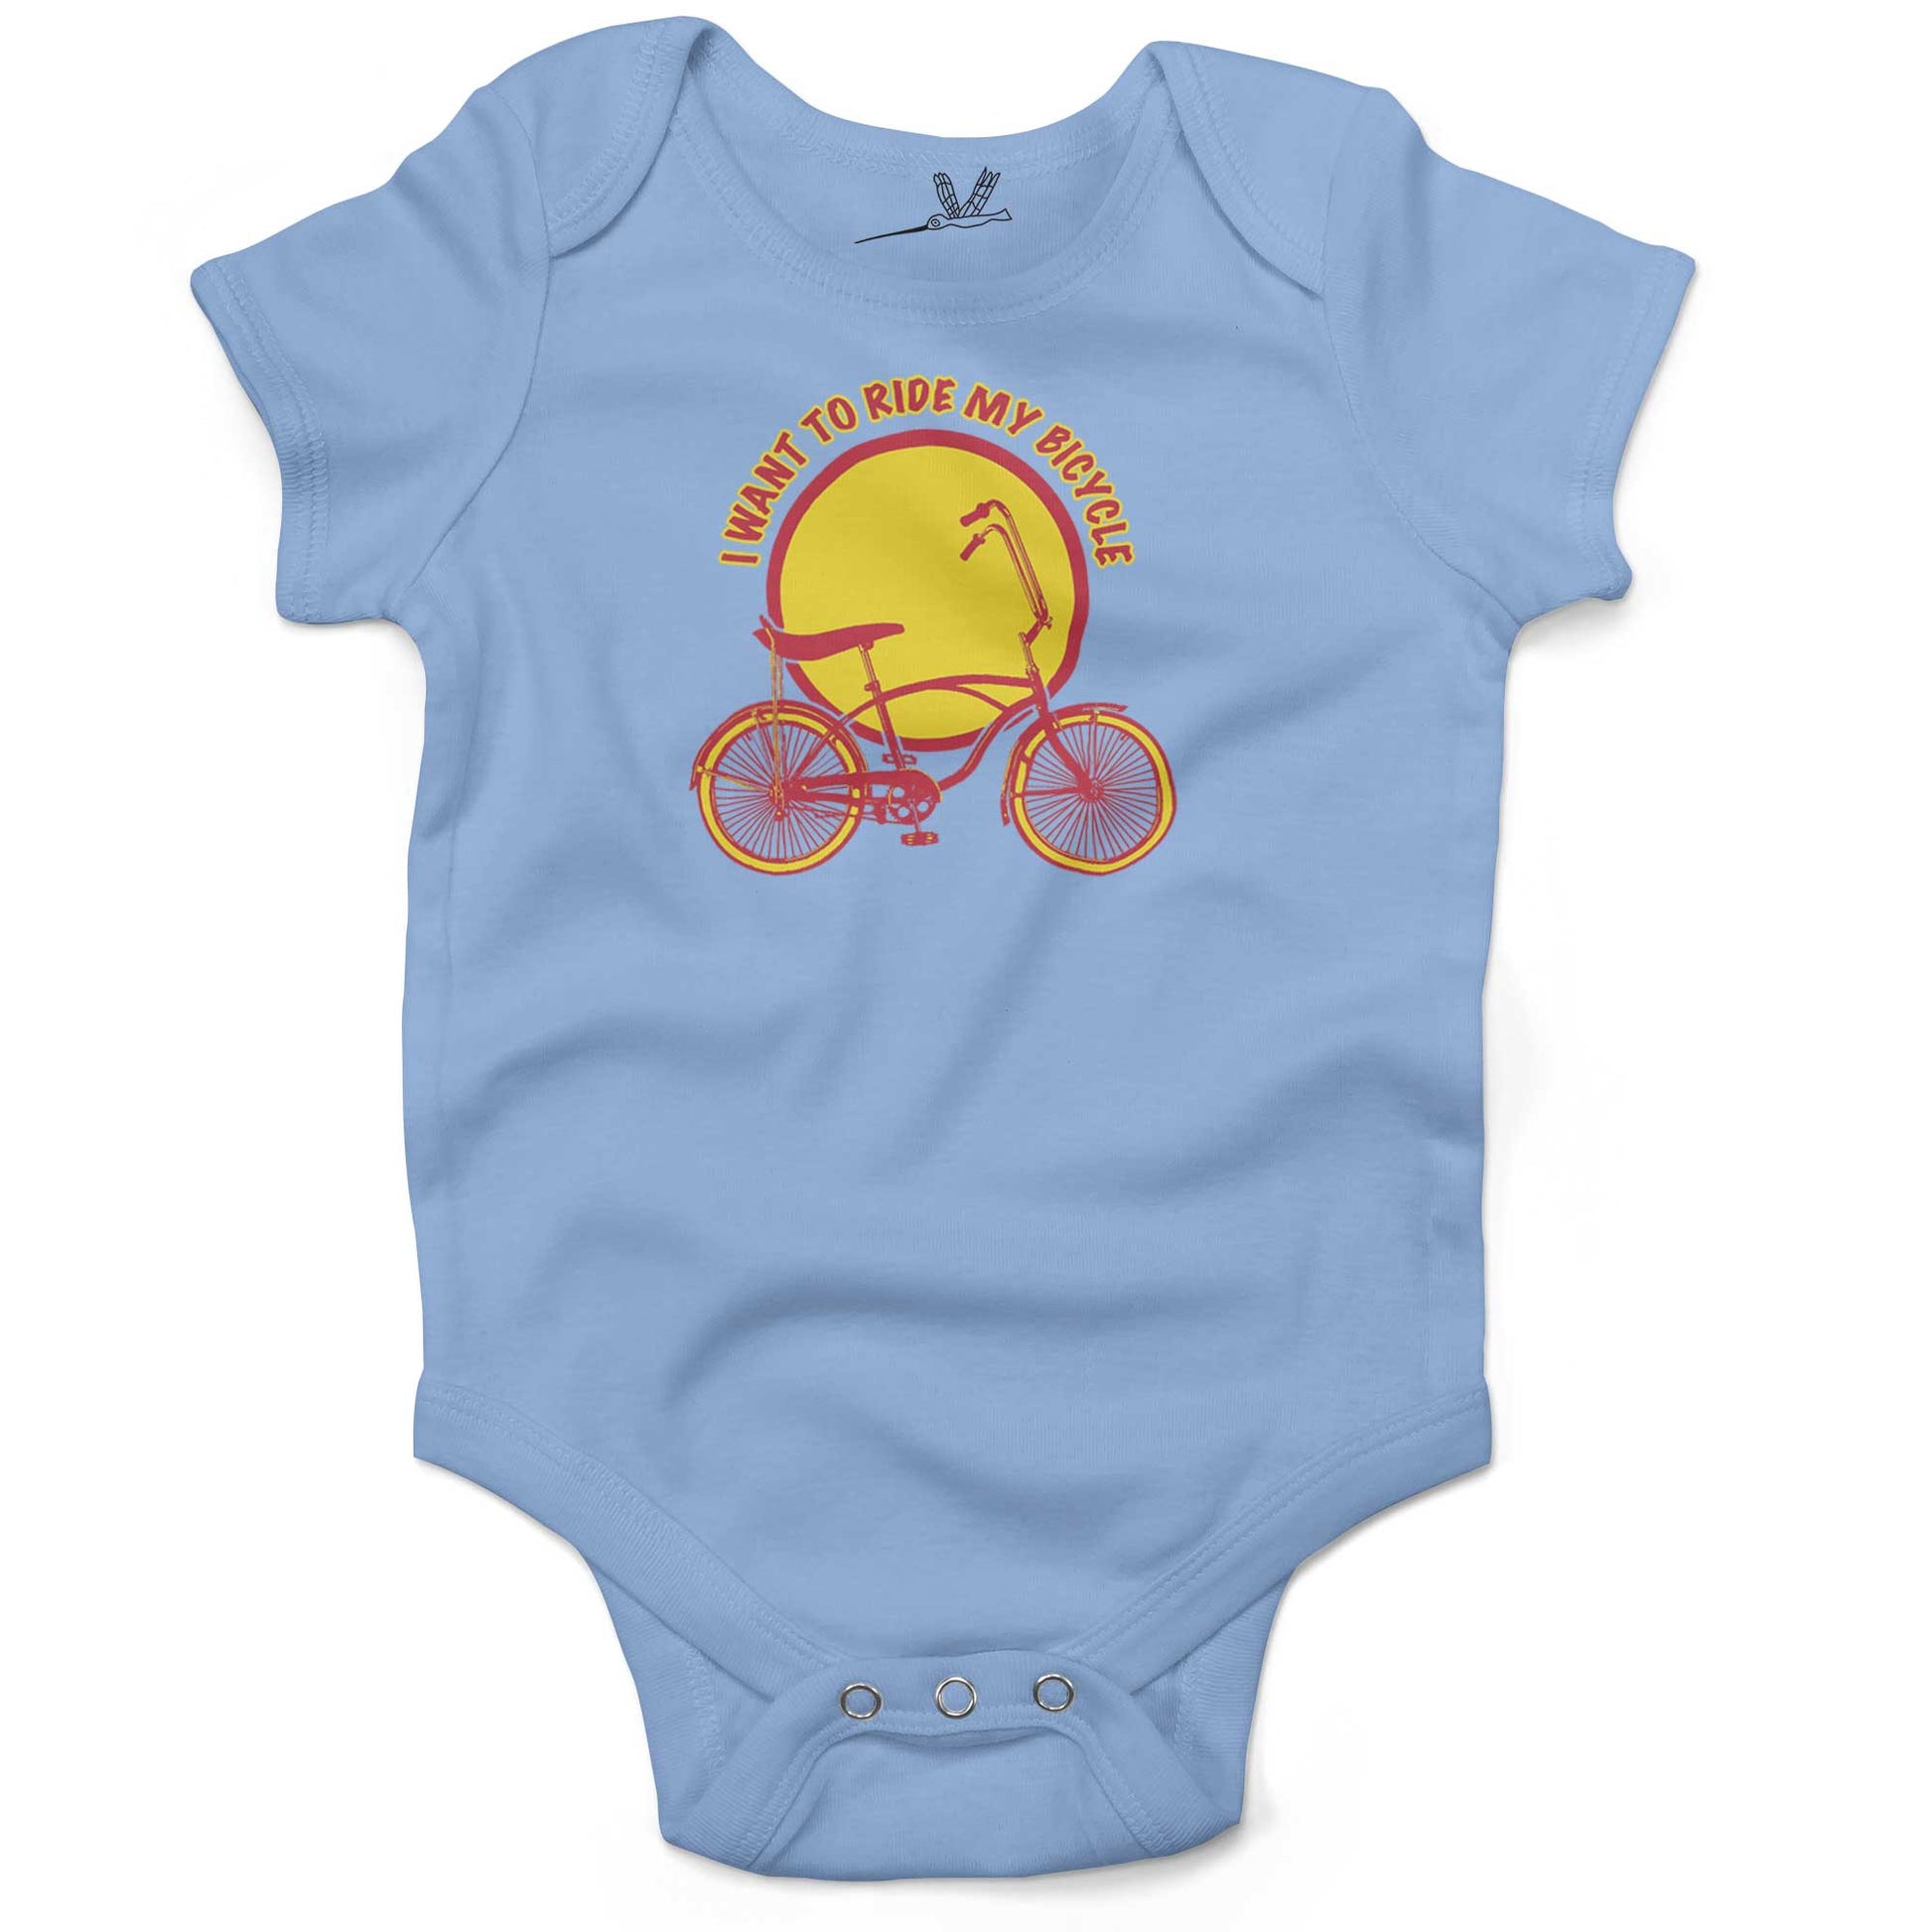 I Want To Ride My Bicycle Infant Bodysuit or Raglan Baby Tee-Organic Baby Blue-3-6 months